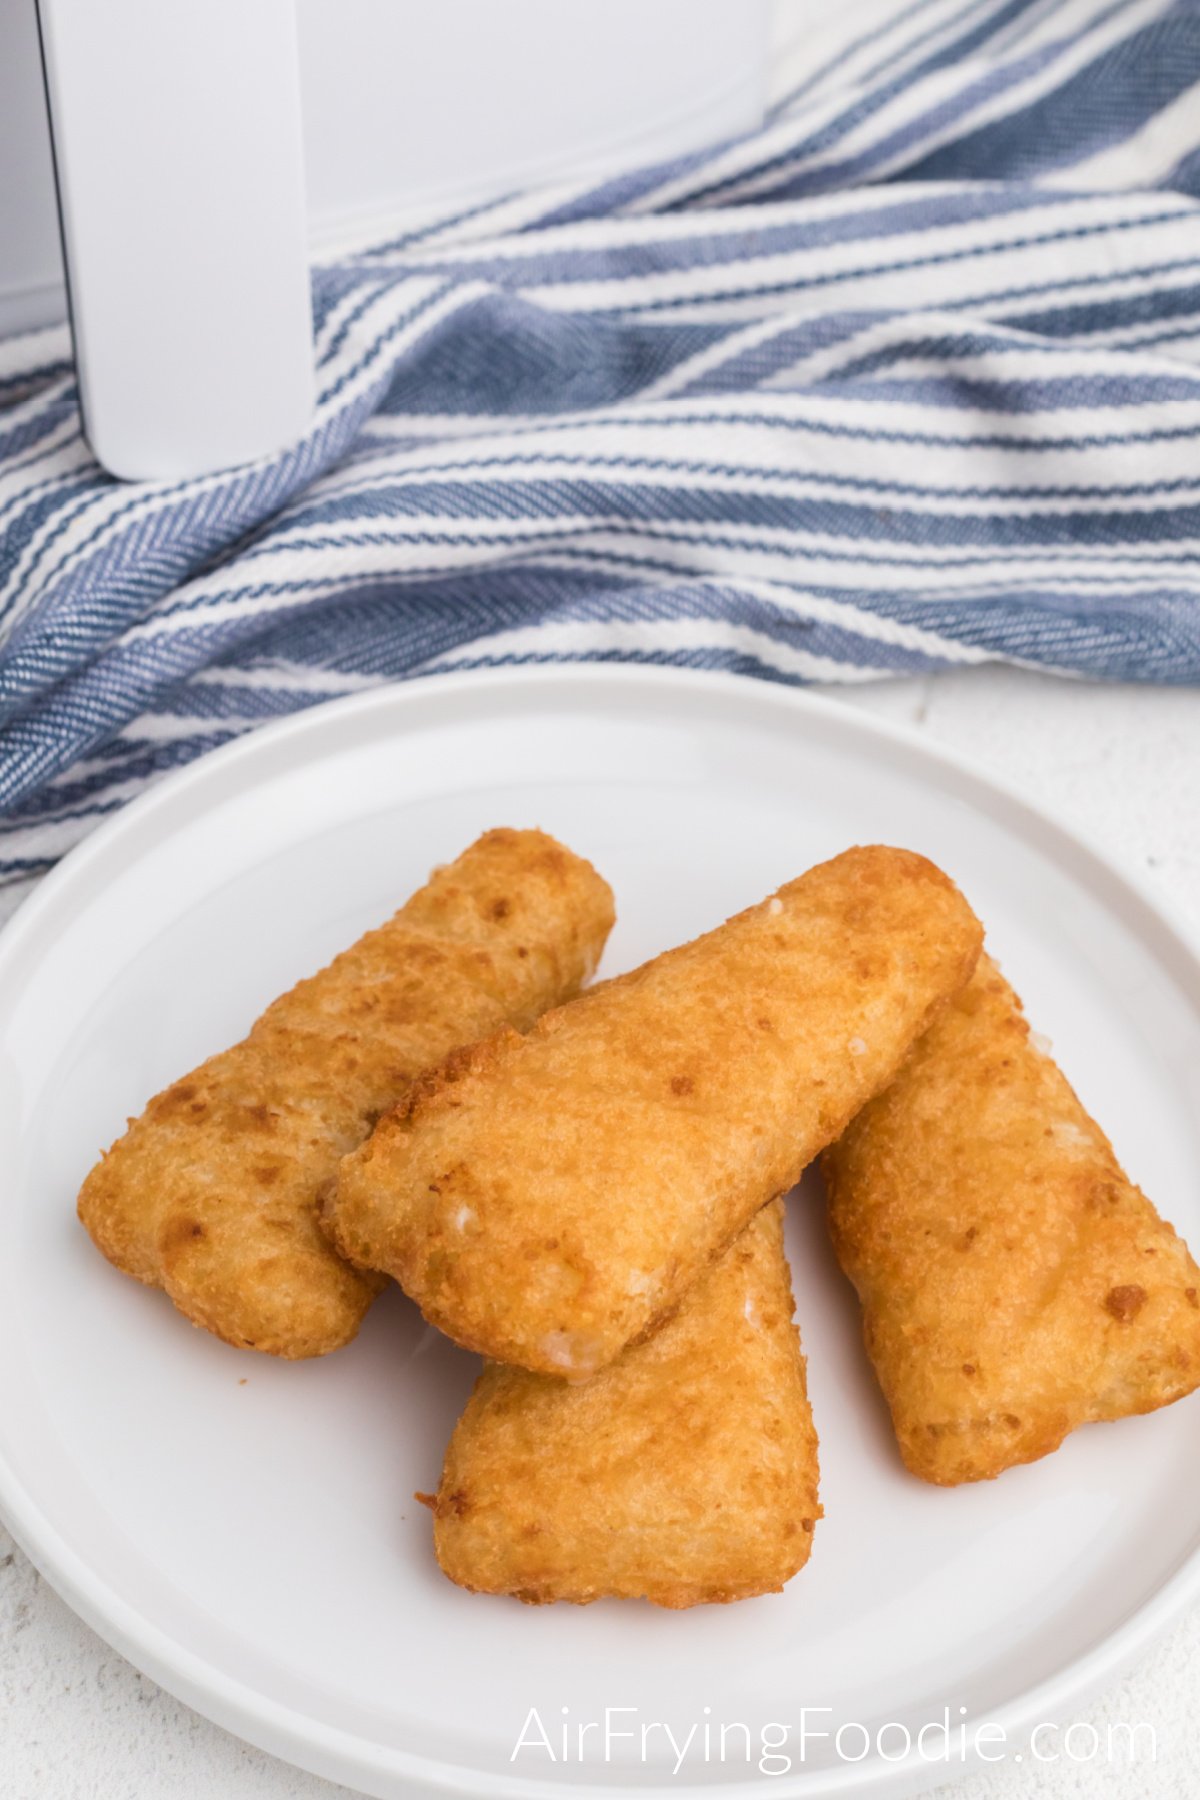 Frozen fish fillets made in the air fryer, fully cooked, and served on a white plate.